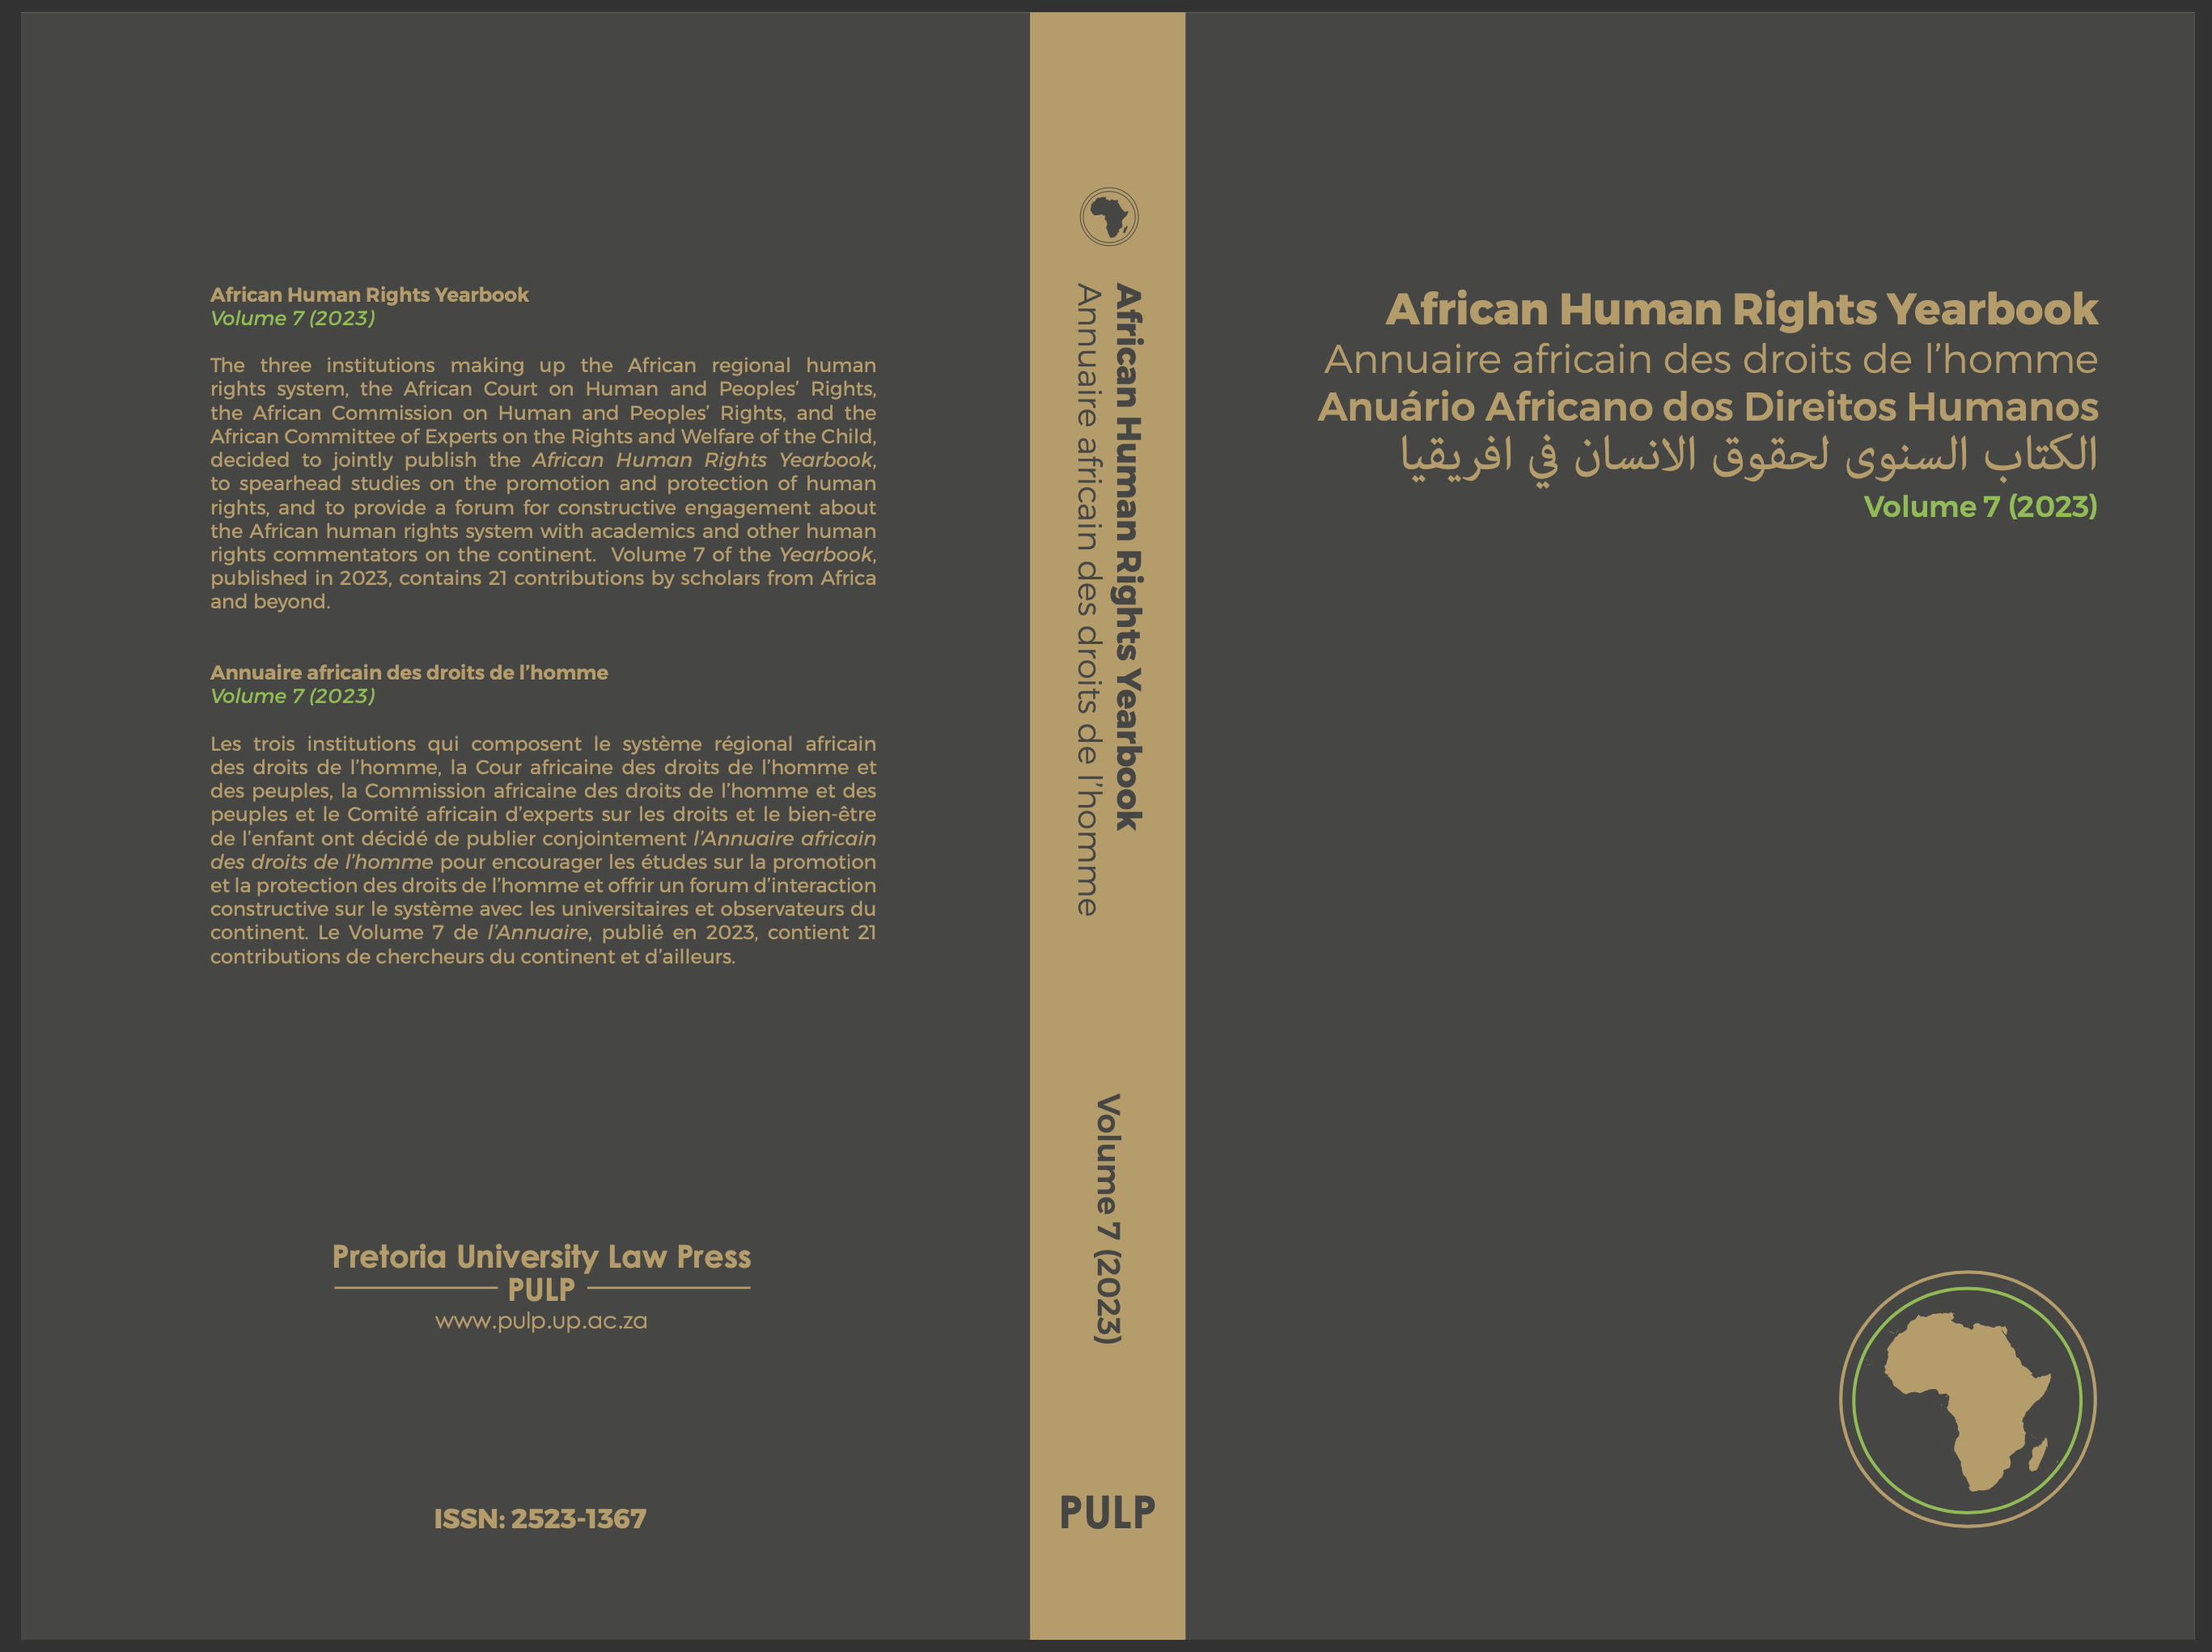 AFRICAN HUMAN RIGHTS YEARBOOK - VOLUME 7 (2023)